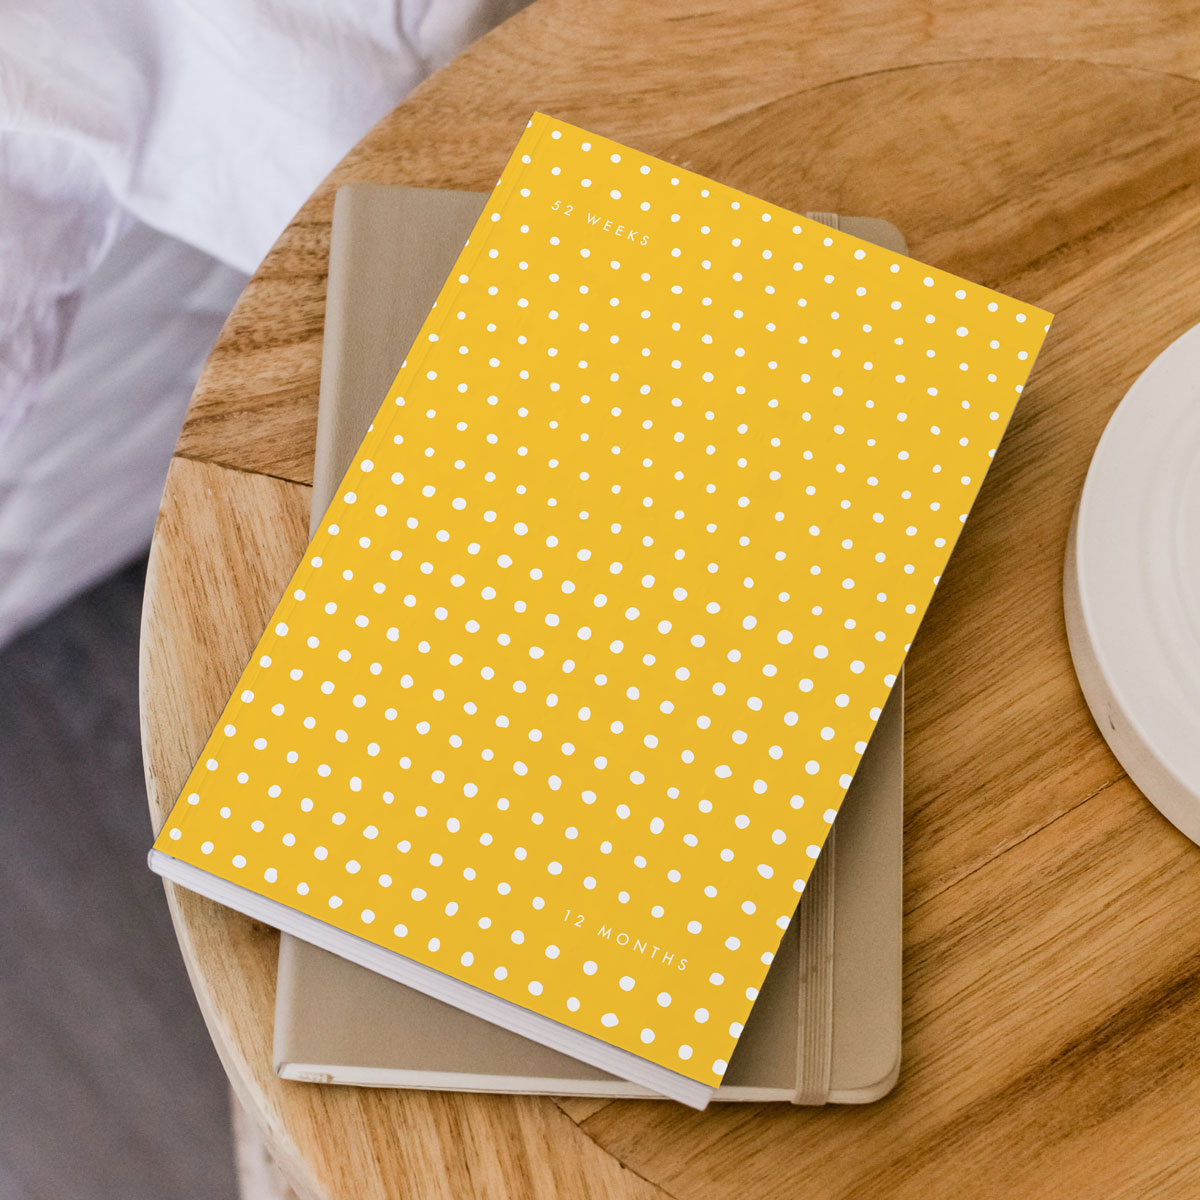 Undated Weekly Planner – yellow + white